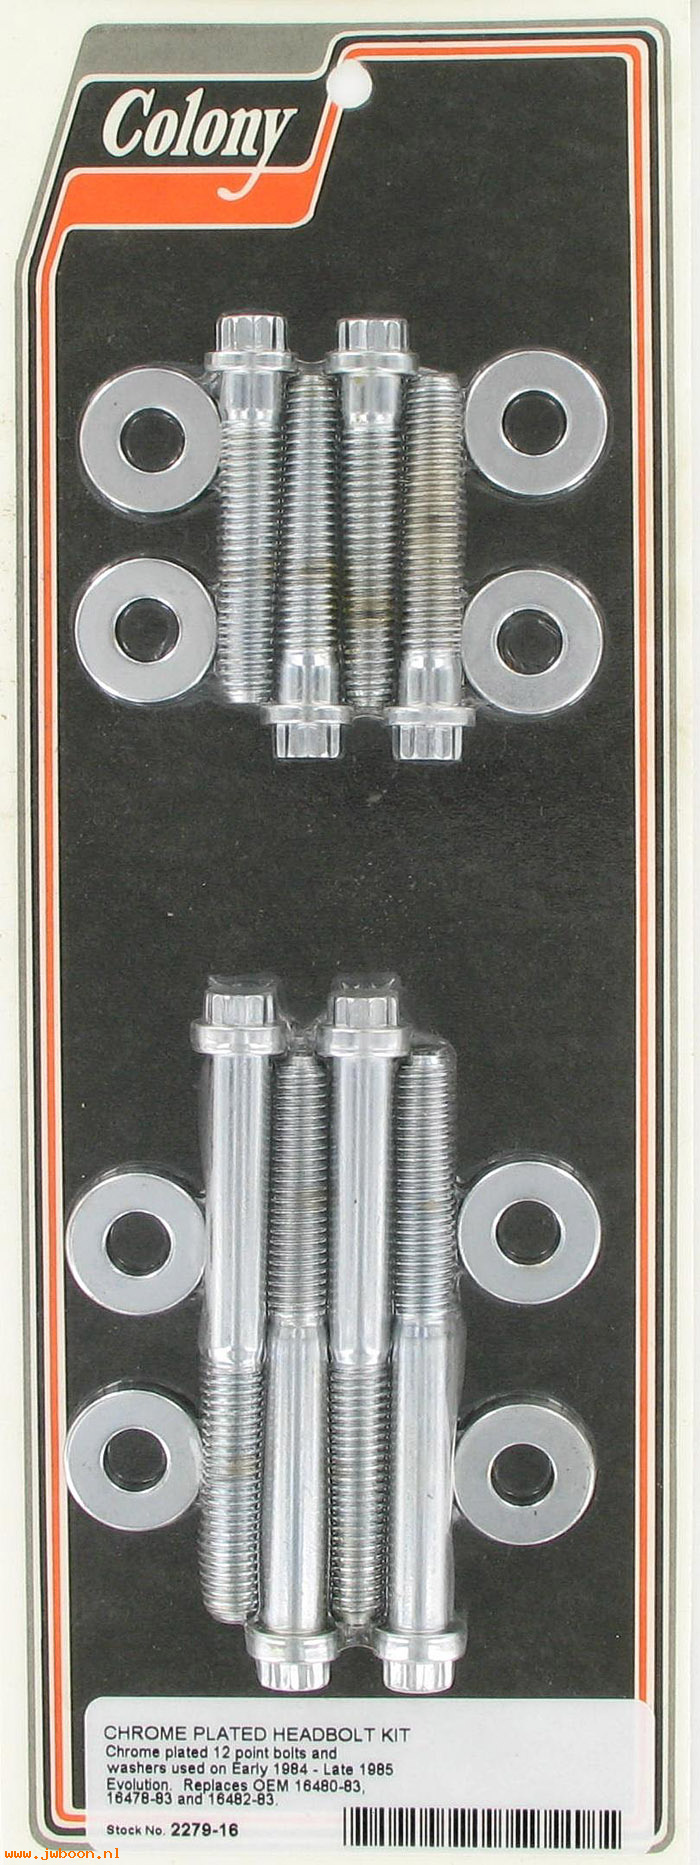 C 2279-16 (16480-83): Head bolt & washer kit - 12 point - Evo 1340cc early'84-late'85